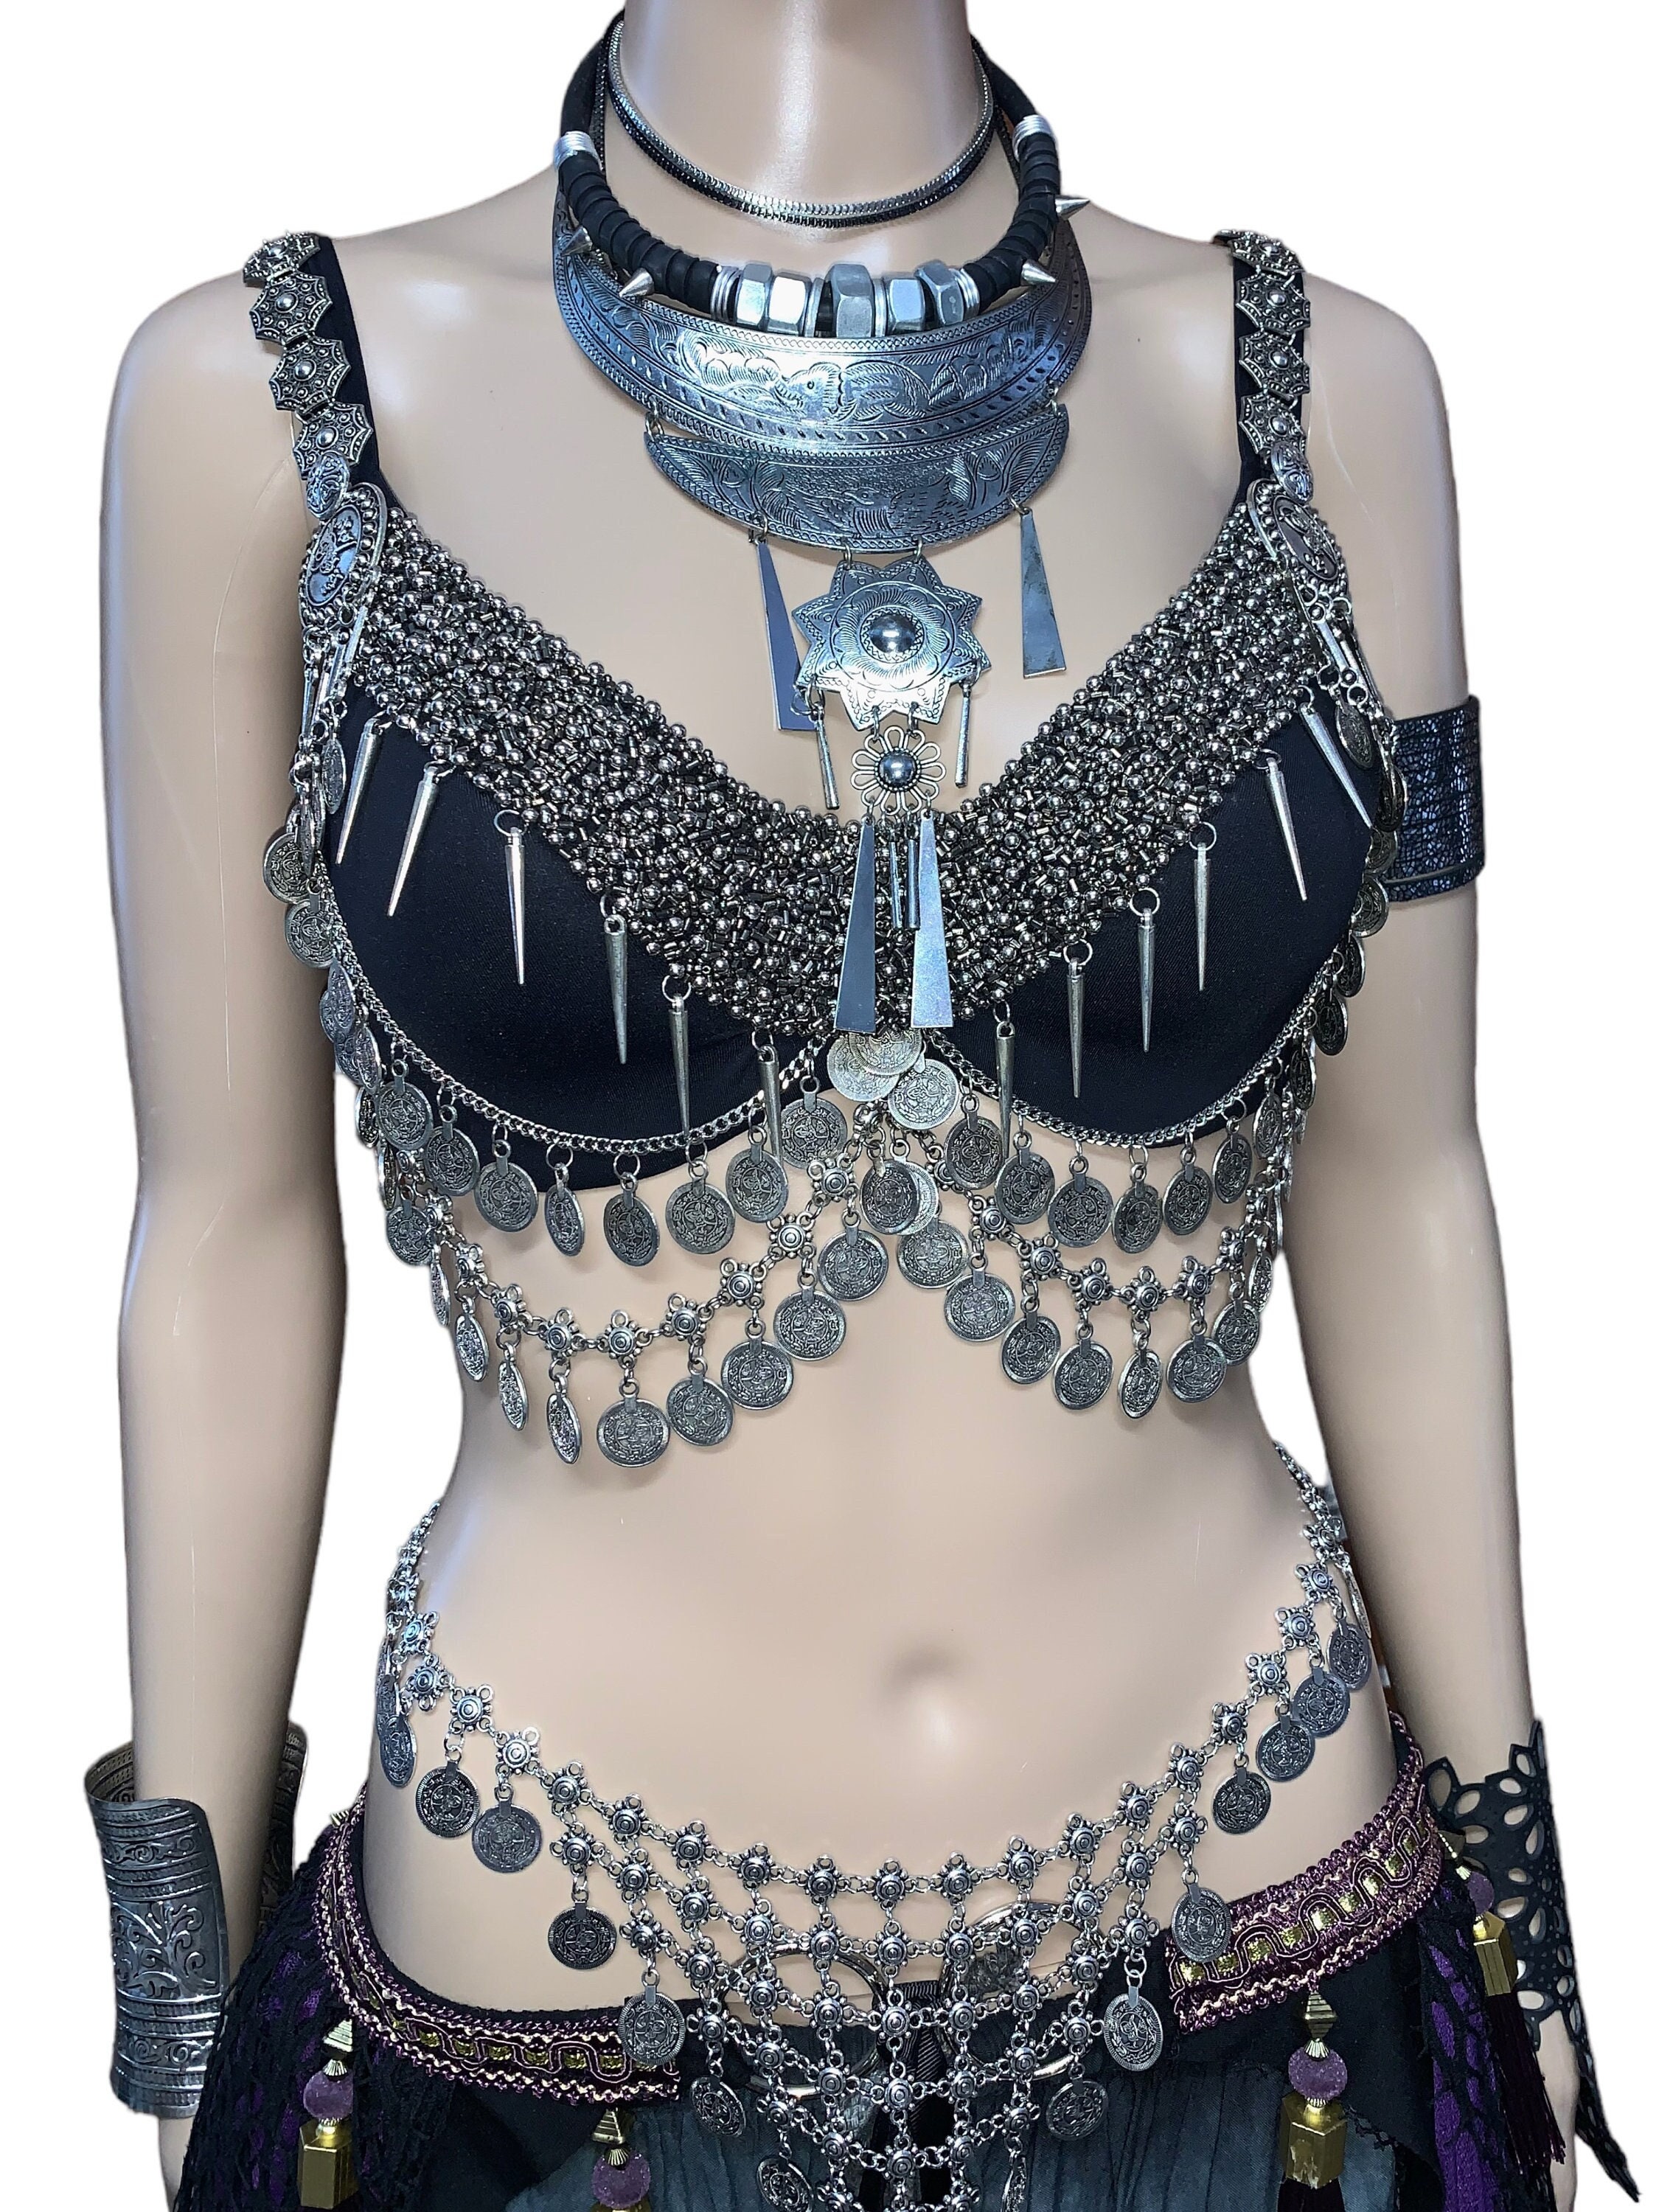 New Ats Tribal Bra Belly Dance Bra Push Up Beaded Coins Vintage